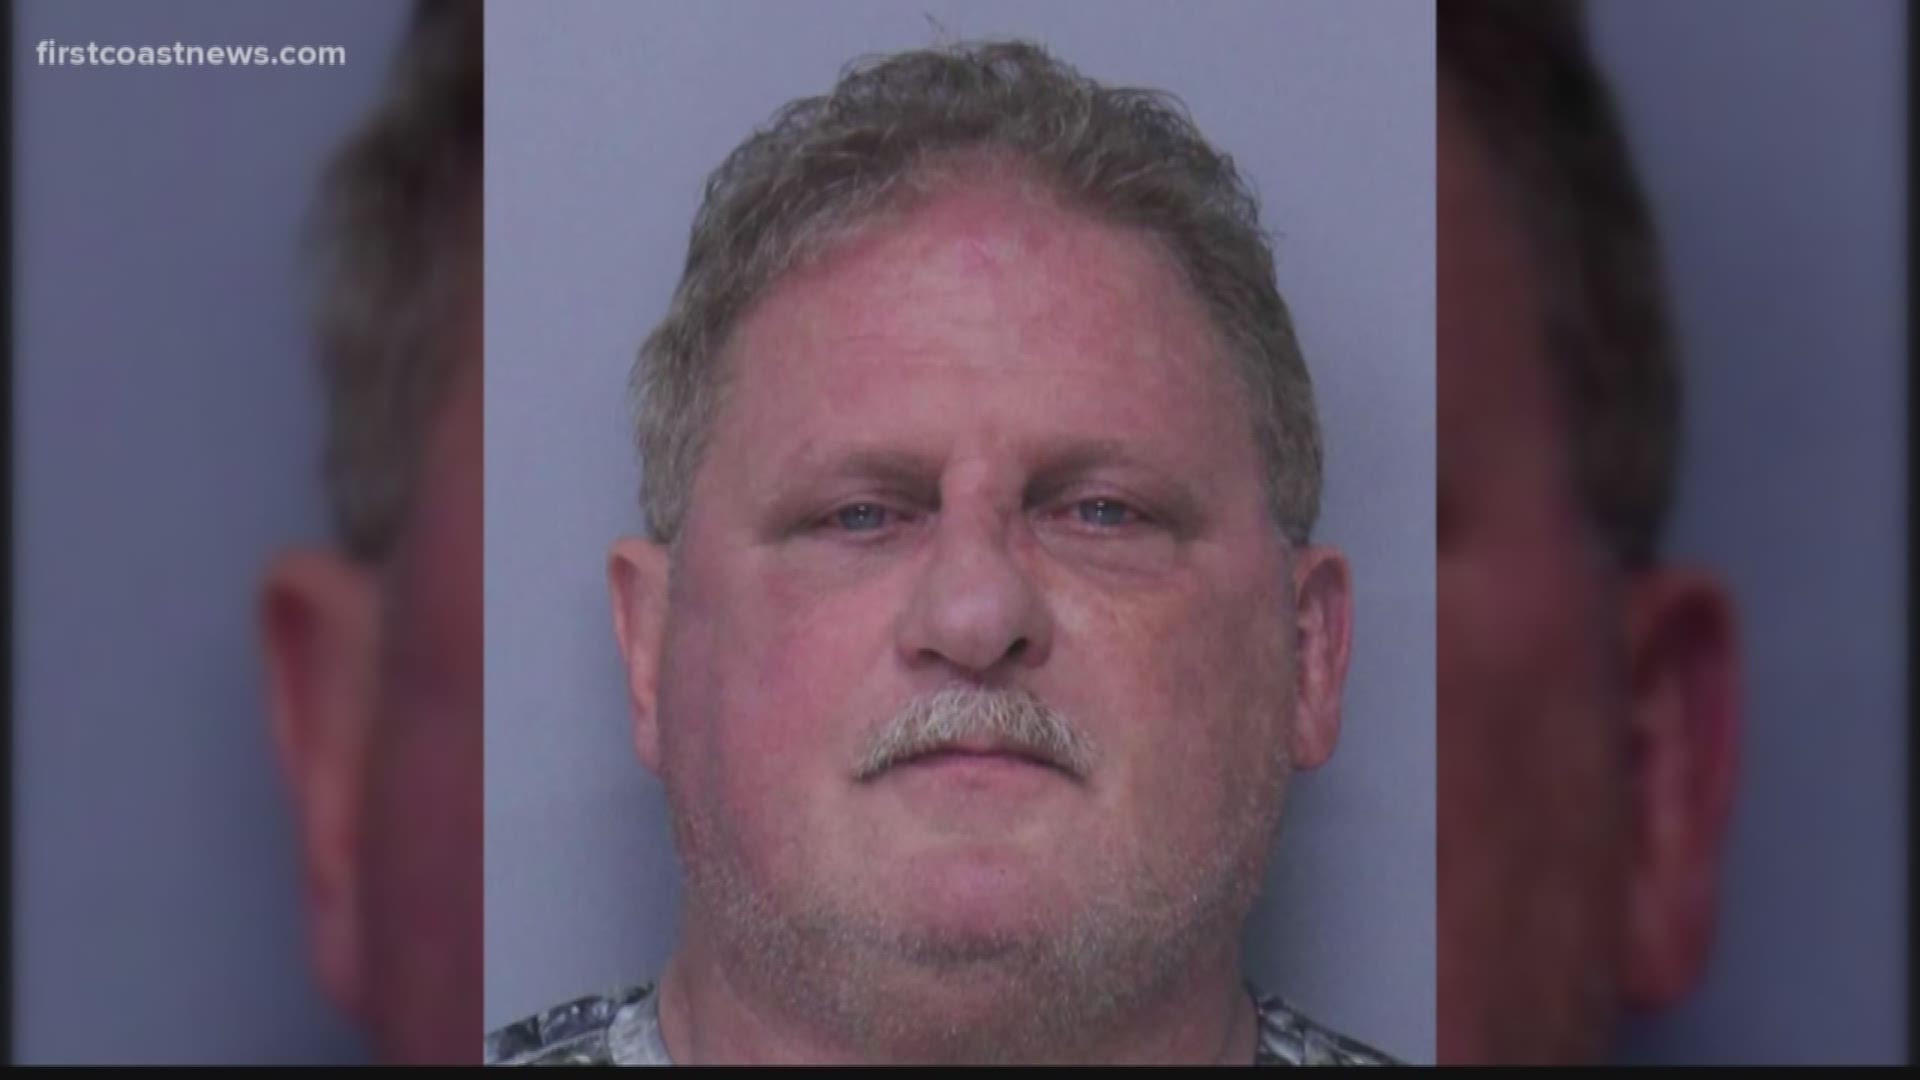 The St. Johns County Sheriff?s Office arrested a 60-year-old man Wednesday after he went on a racist rant against two men he believed to be Muslim or of Middle Eastern descent outside a McDonald?s in St. Augustine.